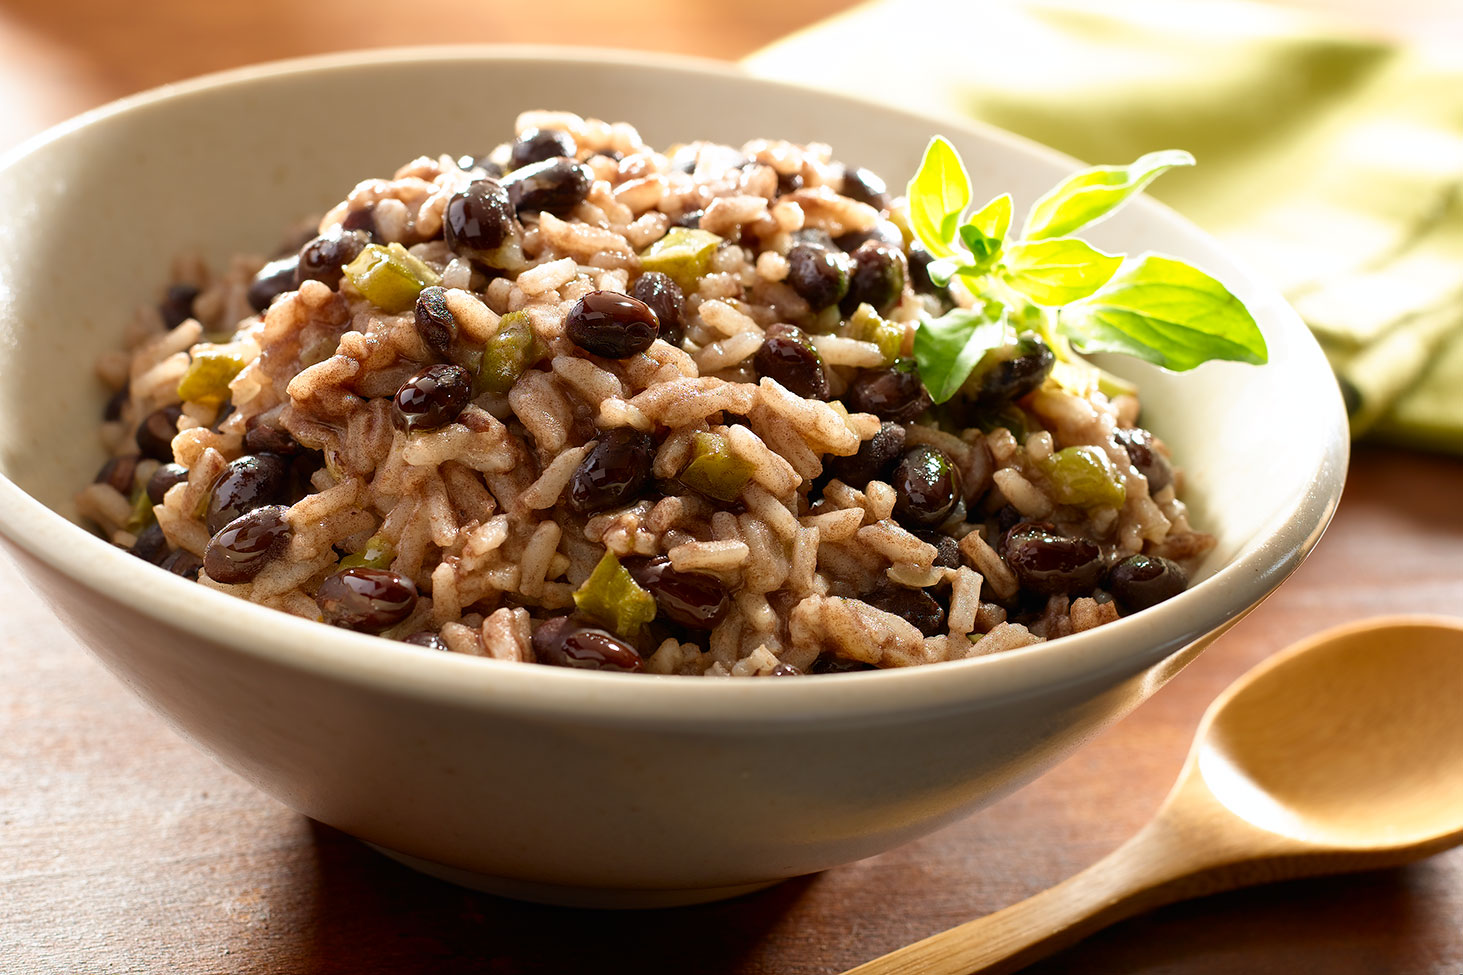 Moros y Cristianos - Black Beans and Rice